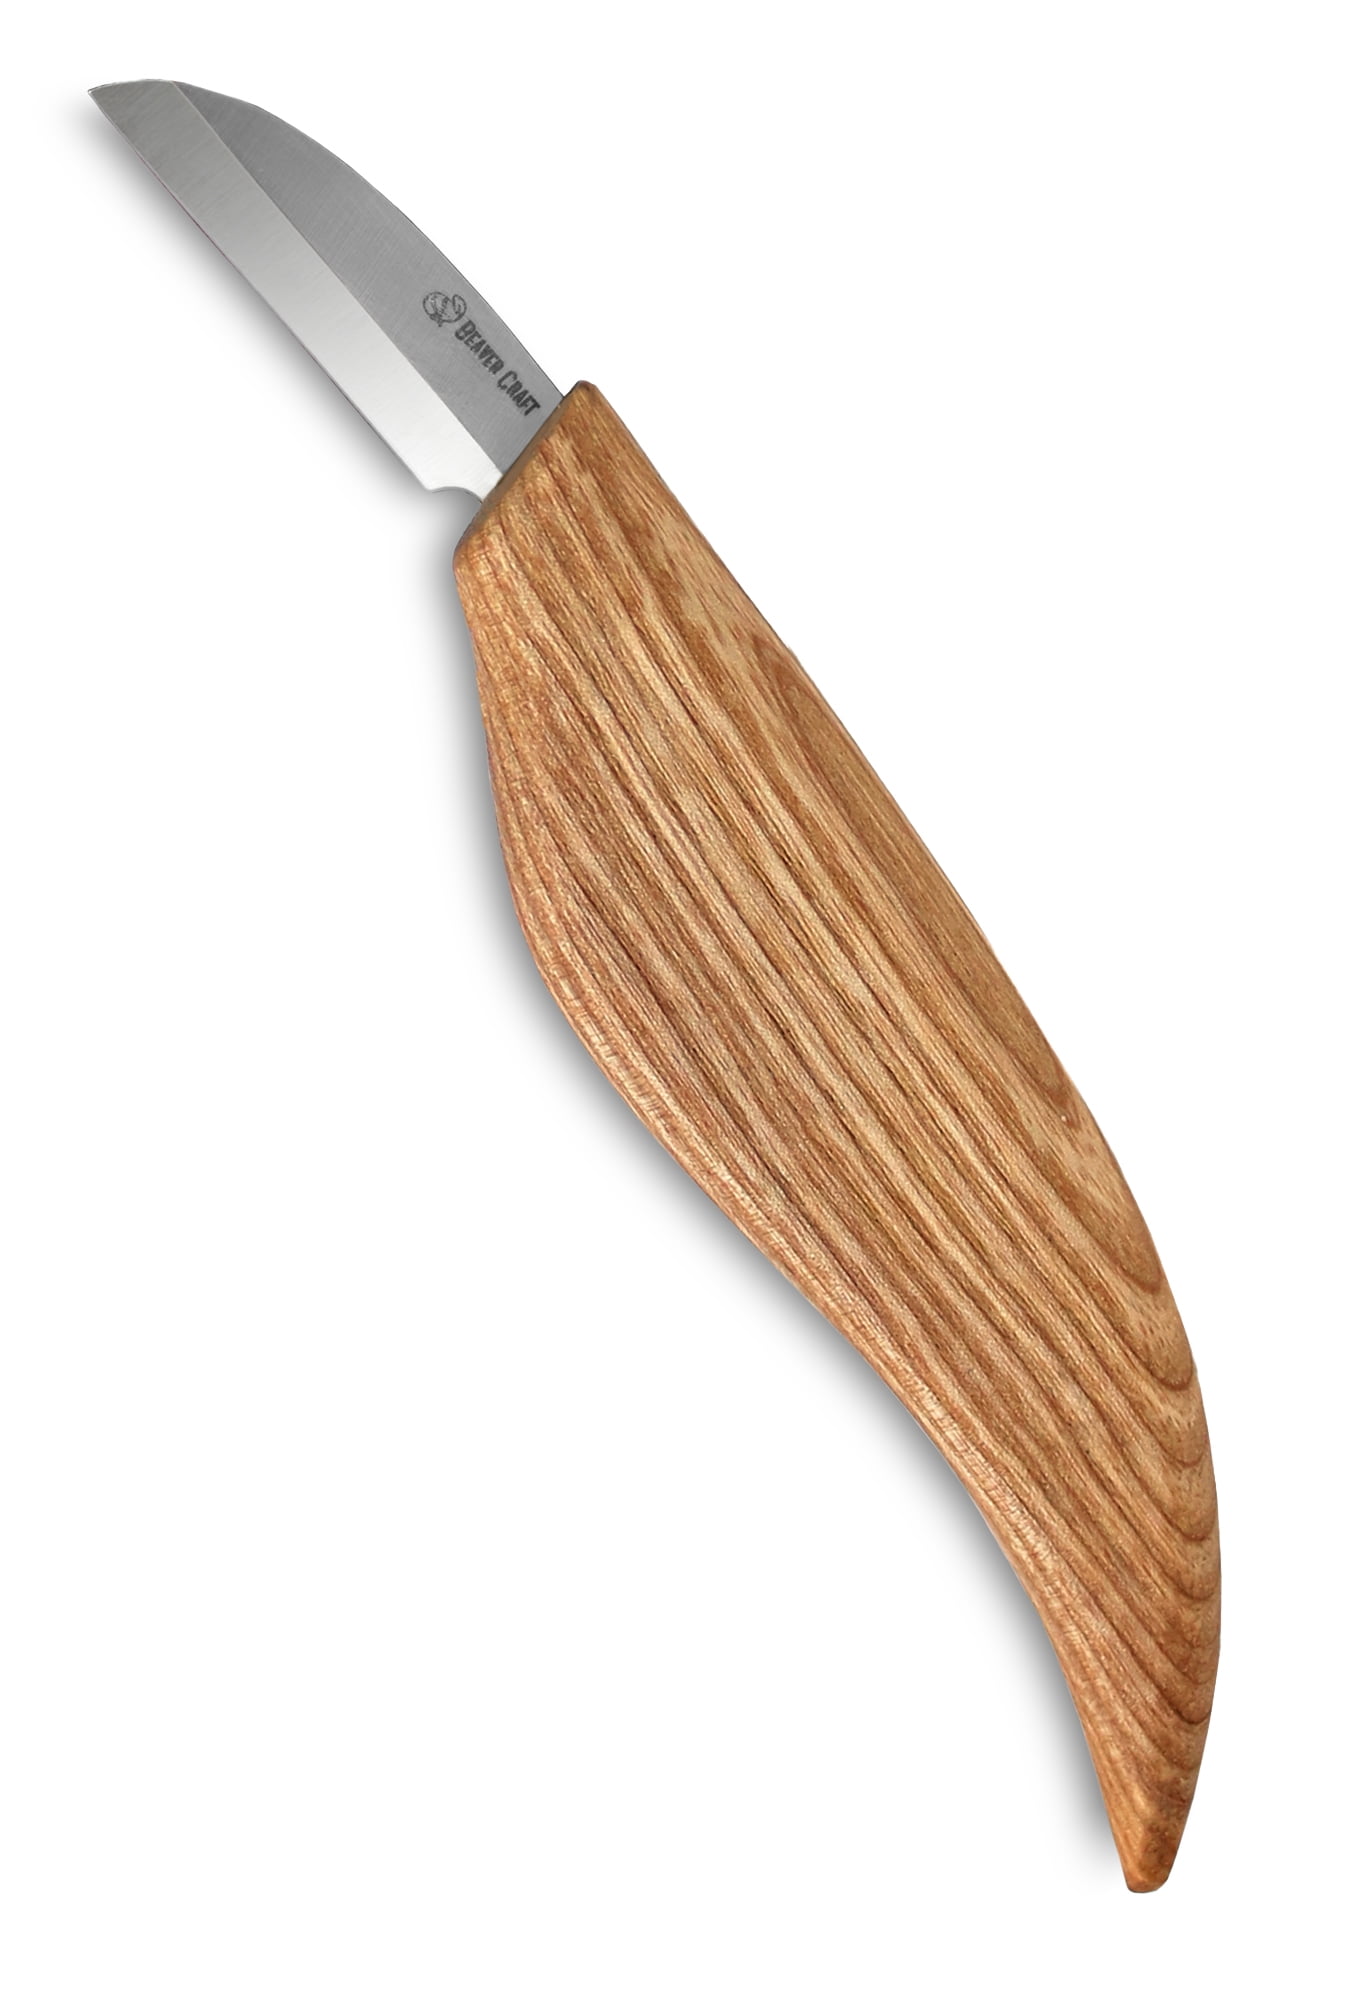 BeaverCraft Cutting Knife C2 6.5 Whittling Knife for Fine Chip Carving  Wood and General Purpose Wood Carving Knife Bench Detail Carving Knife  Carbon Steel and Whittling for Beginners 